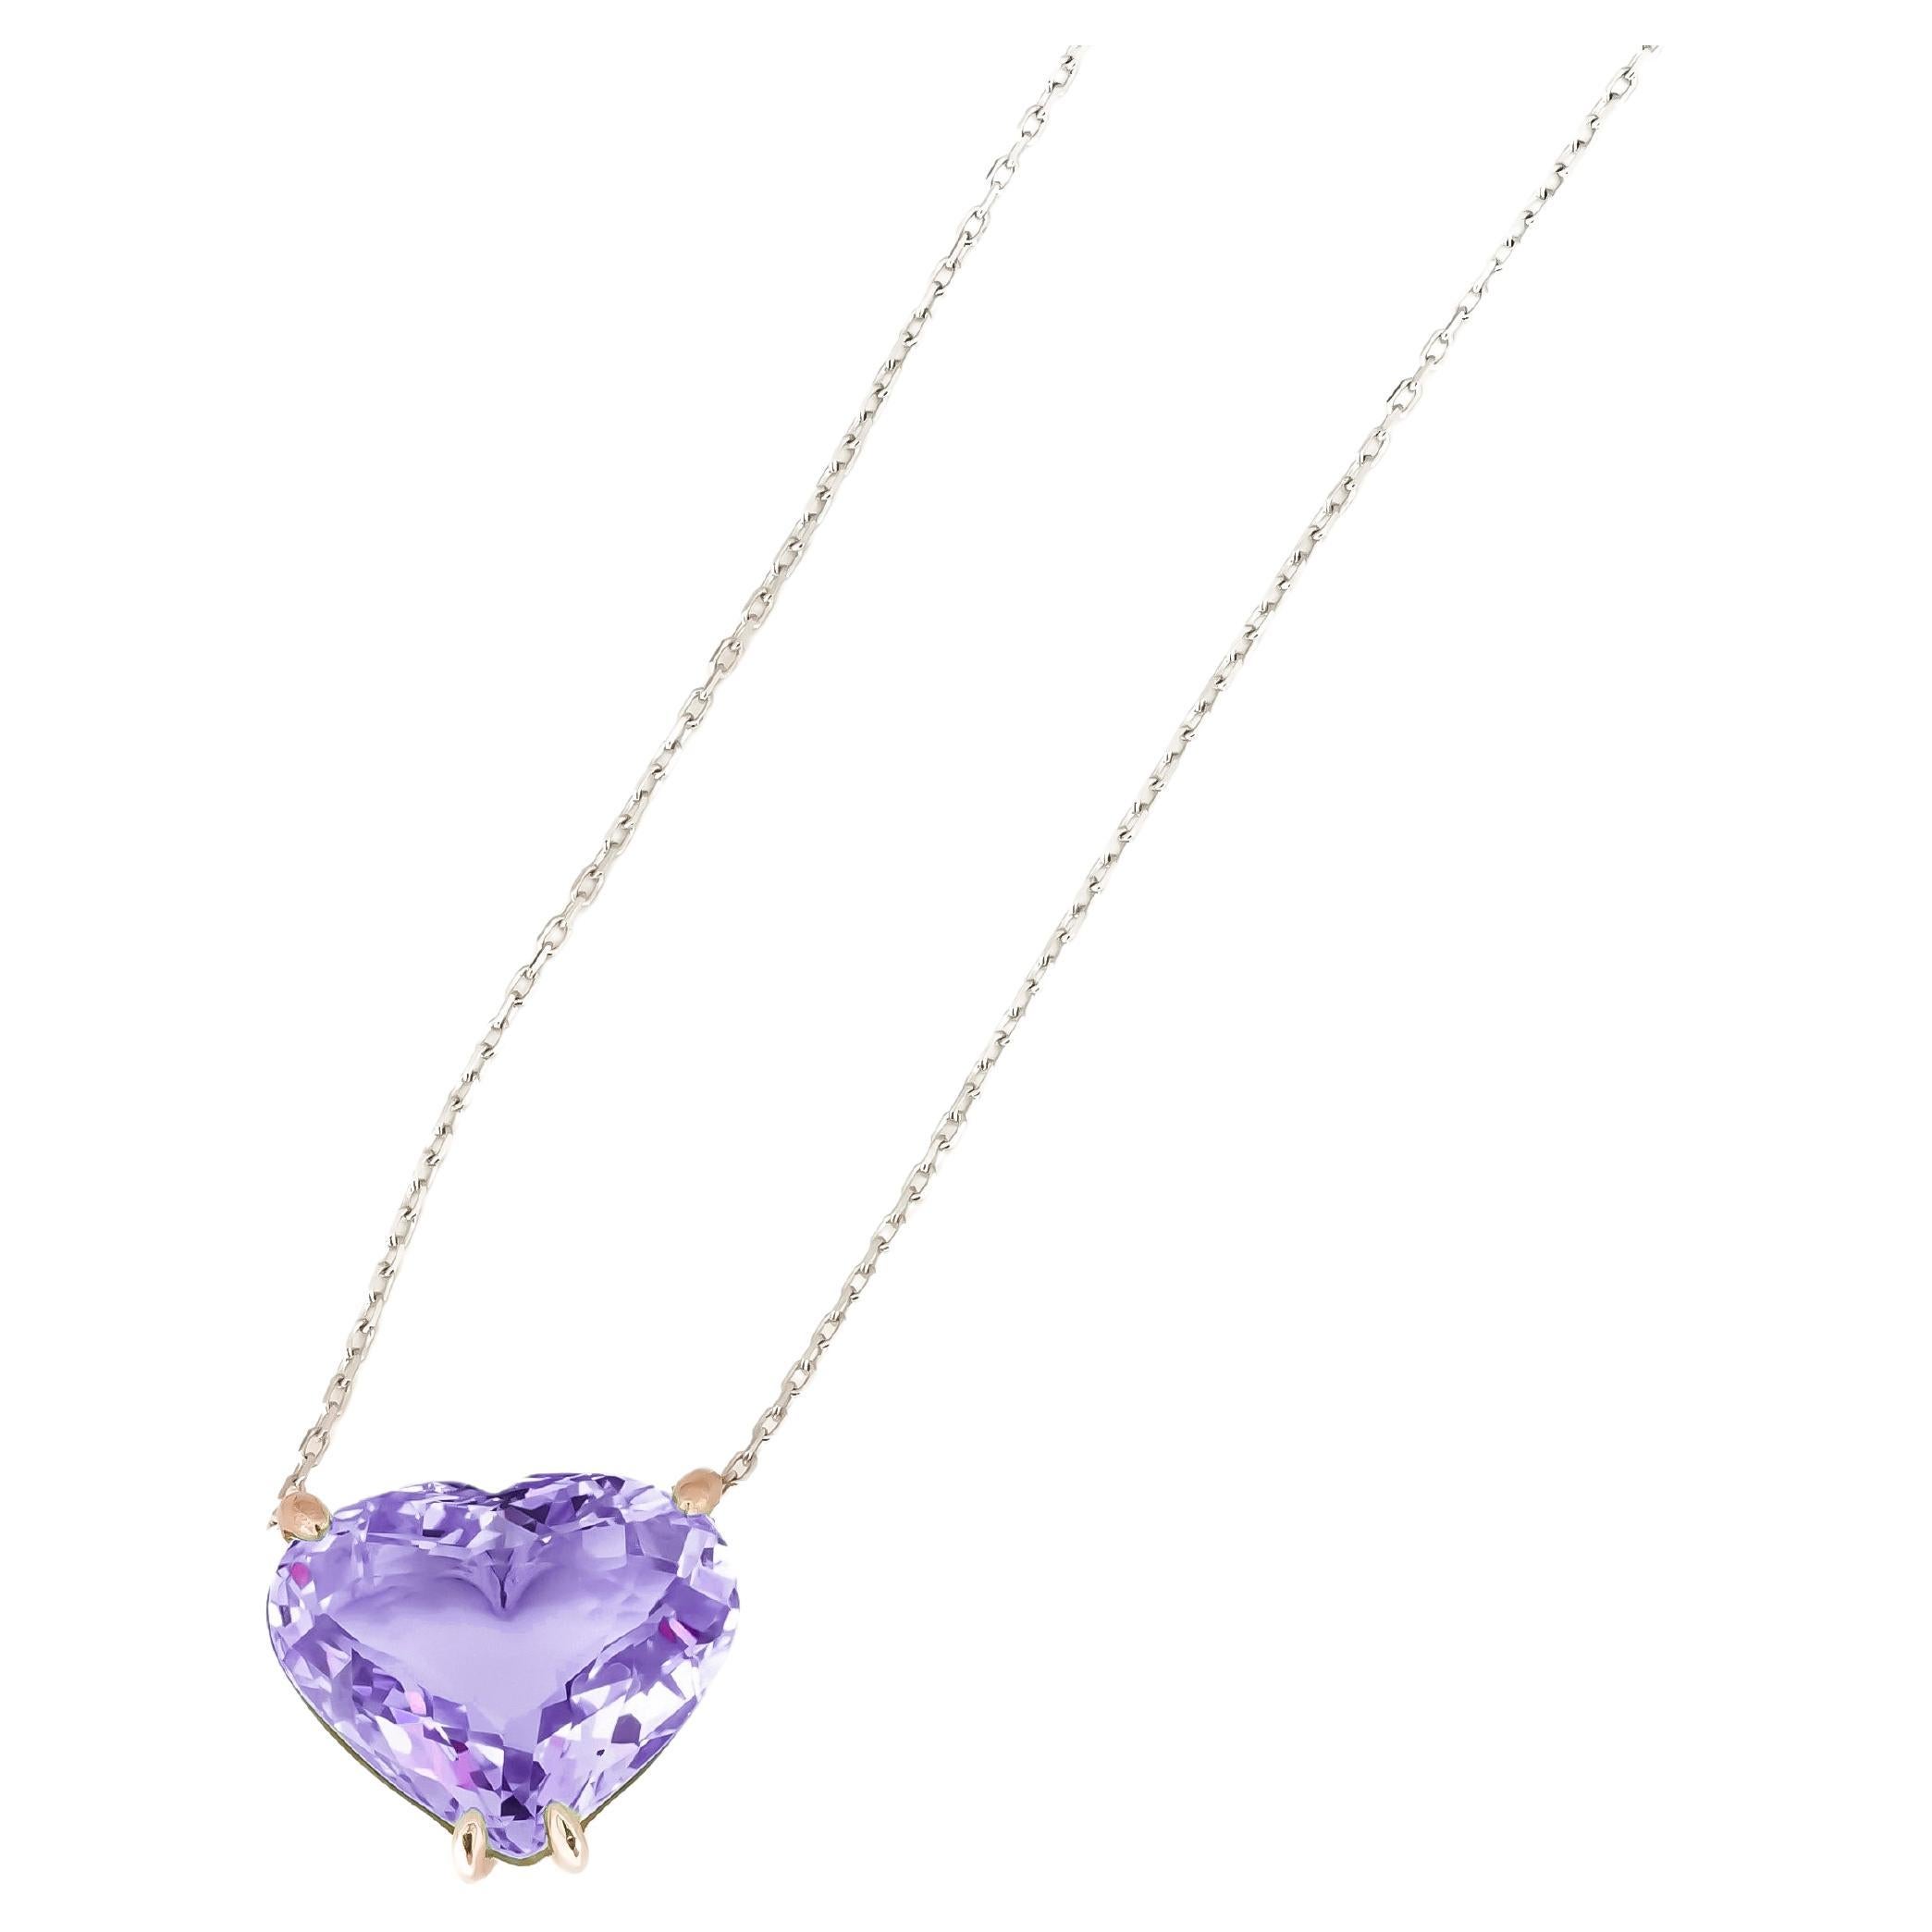 Heart shaped amethyst pendant necklace in 14k gold. 